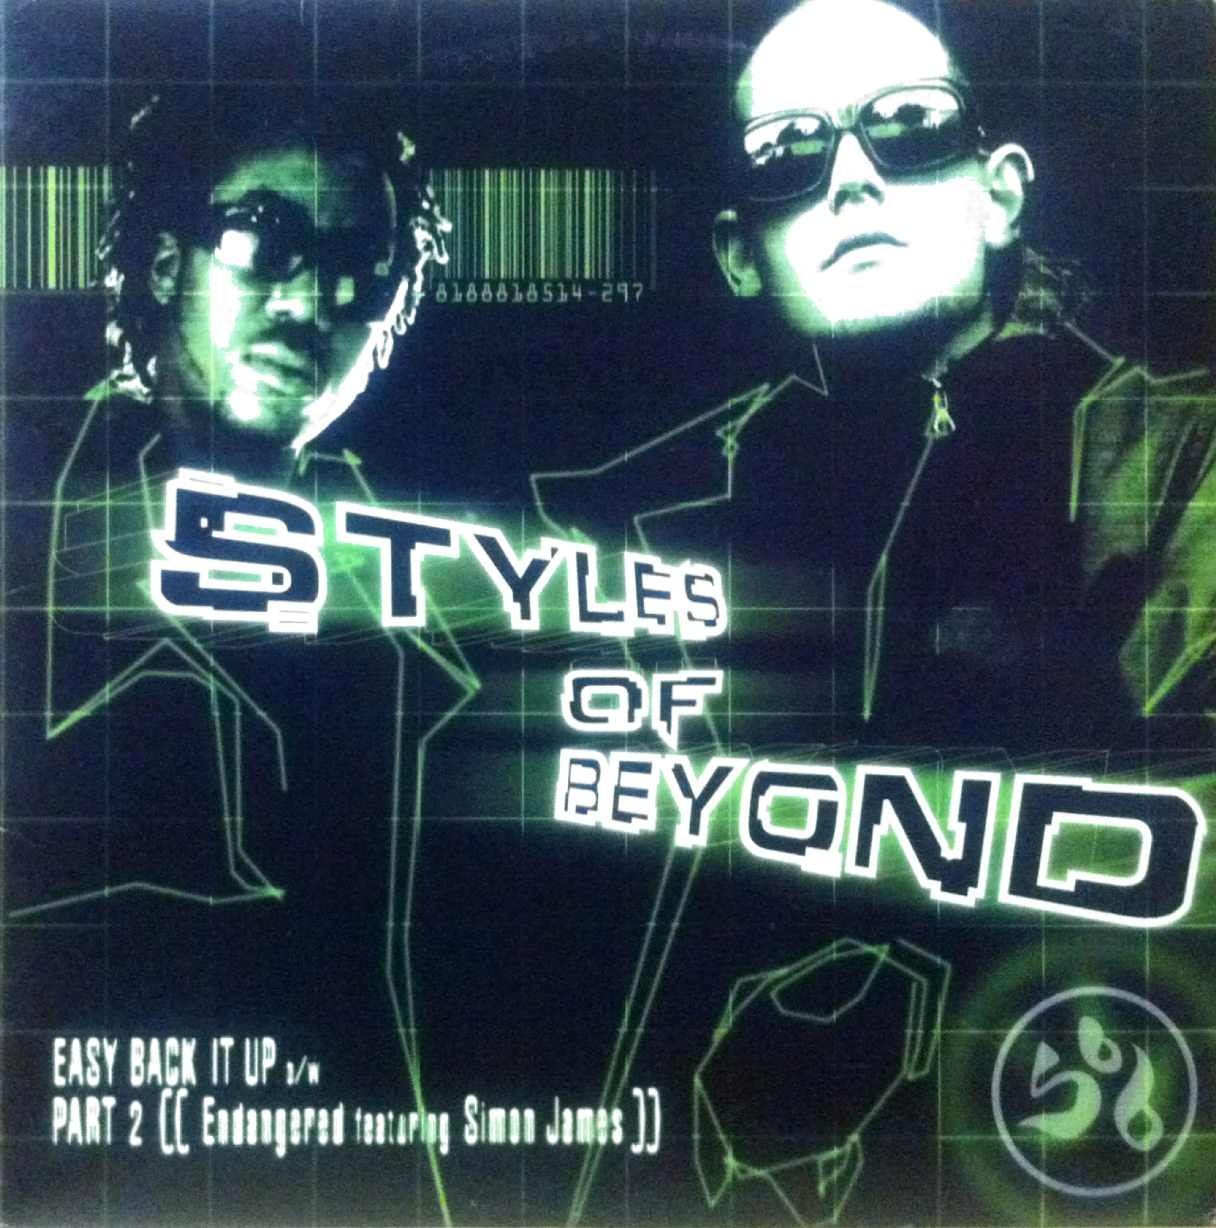 STYLES OF BEYOND / EASY BACK IT UP